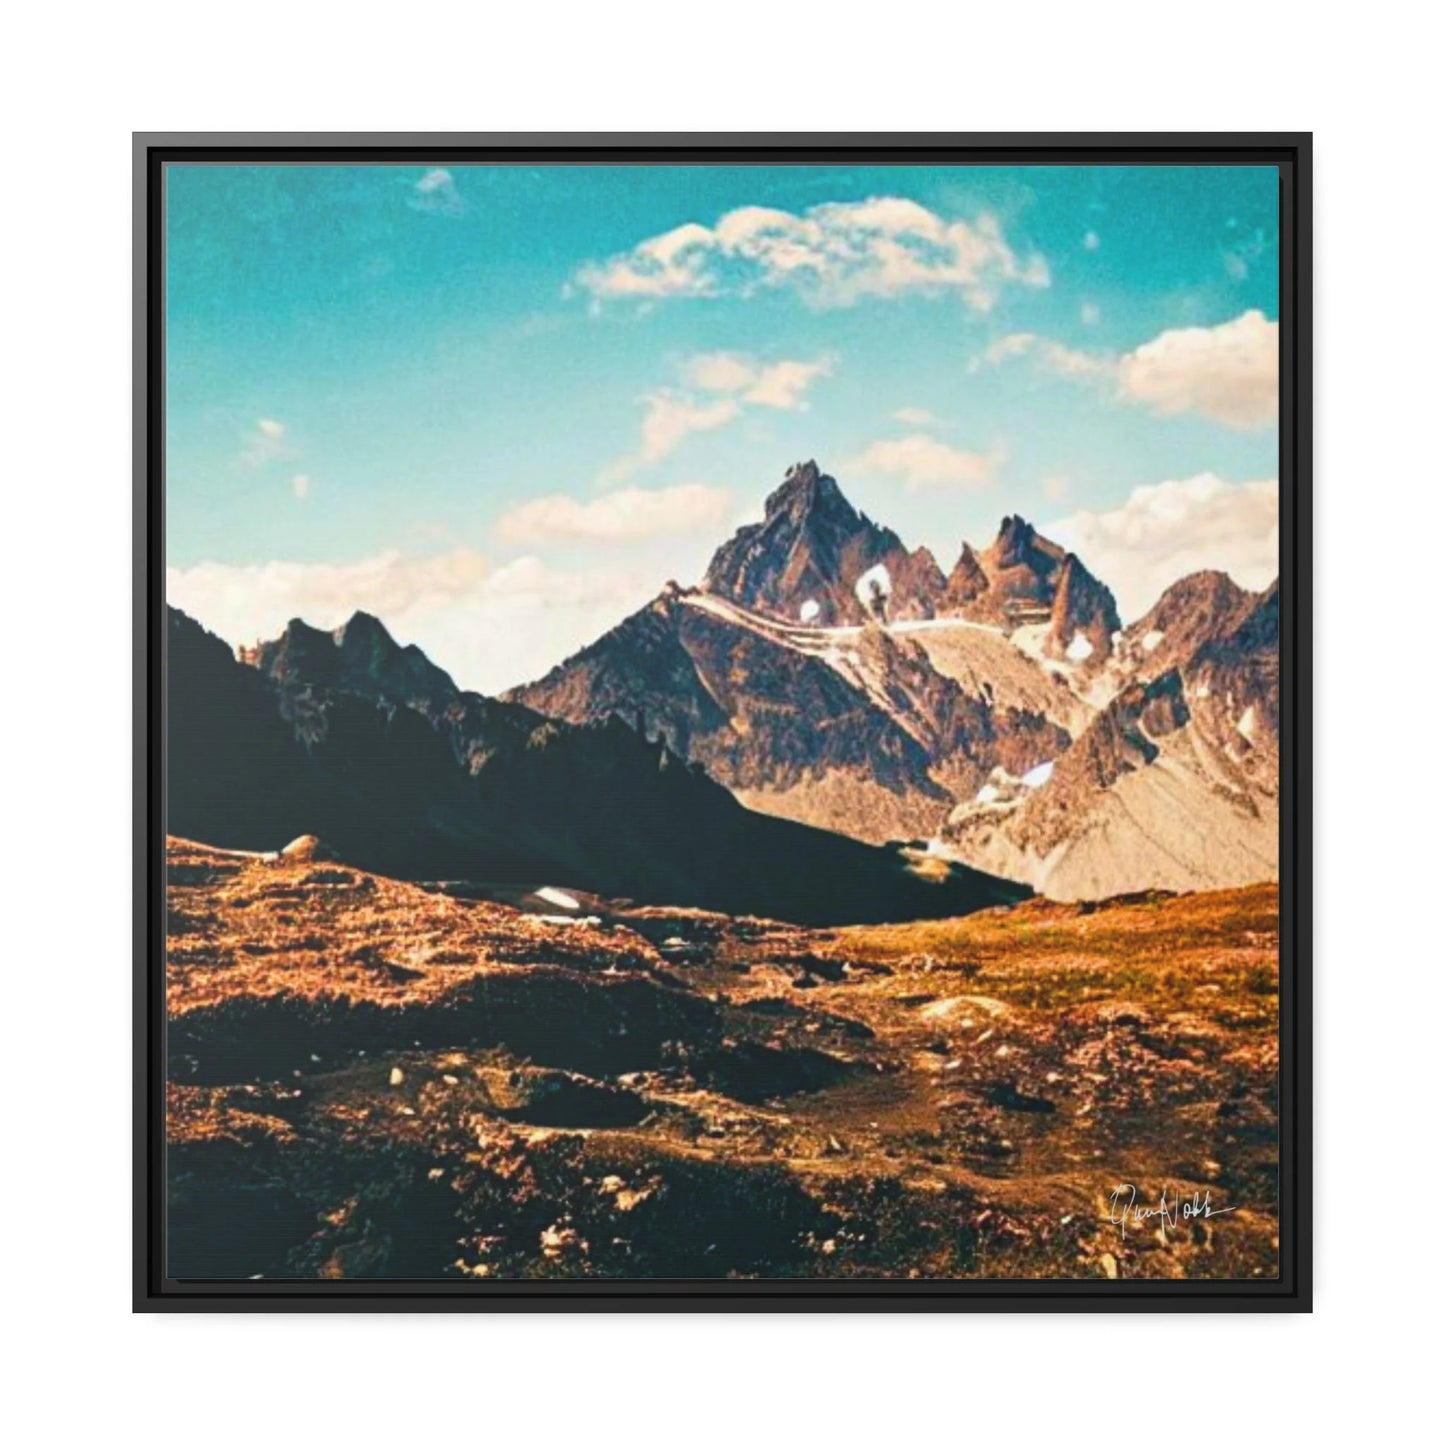 "Exquisite Framed Canvas Prints of Mountain Fine Art Photography by Queennoble"